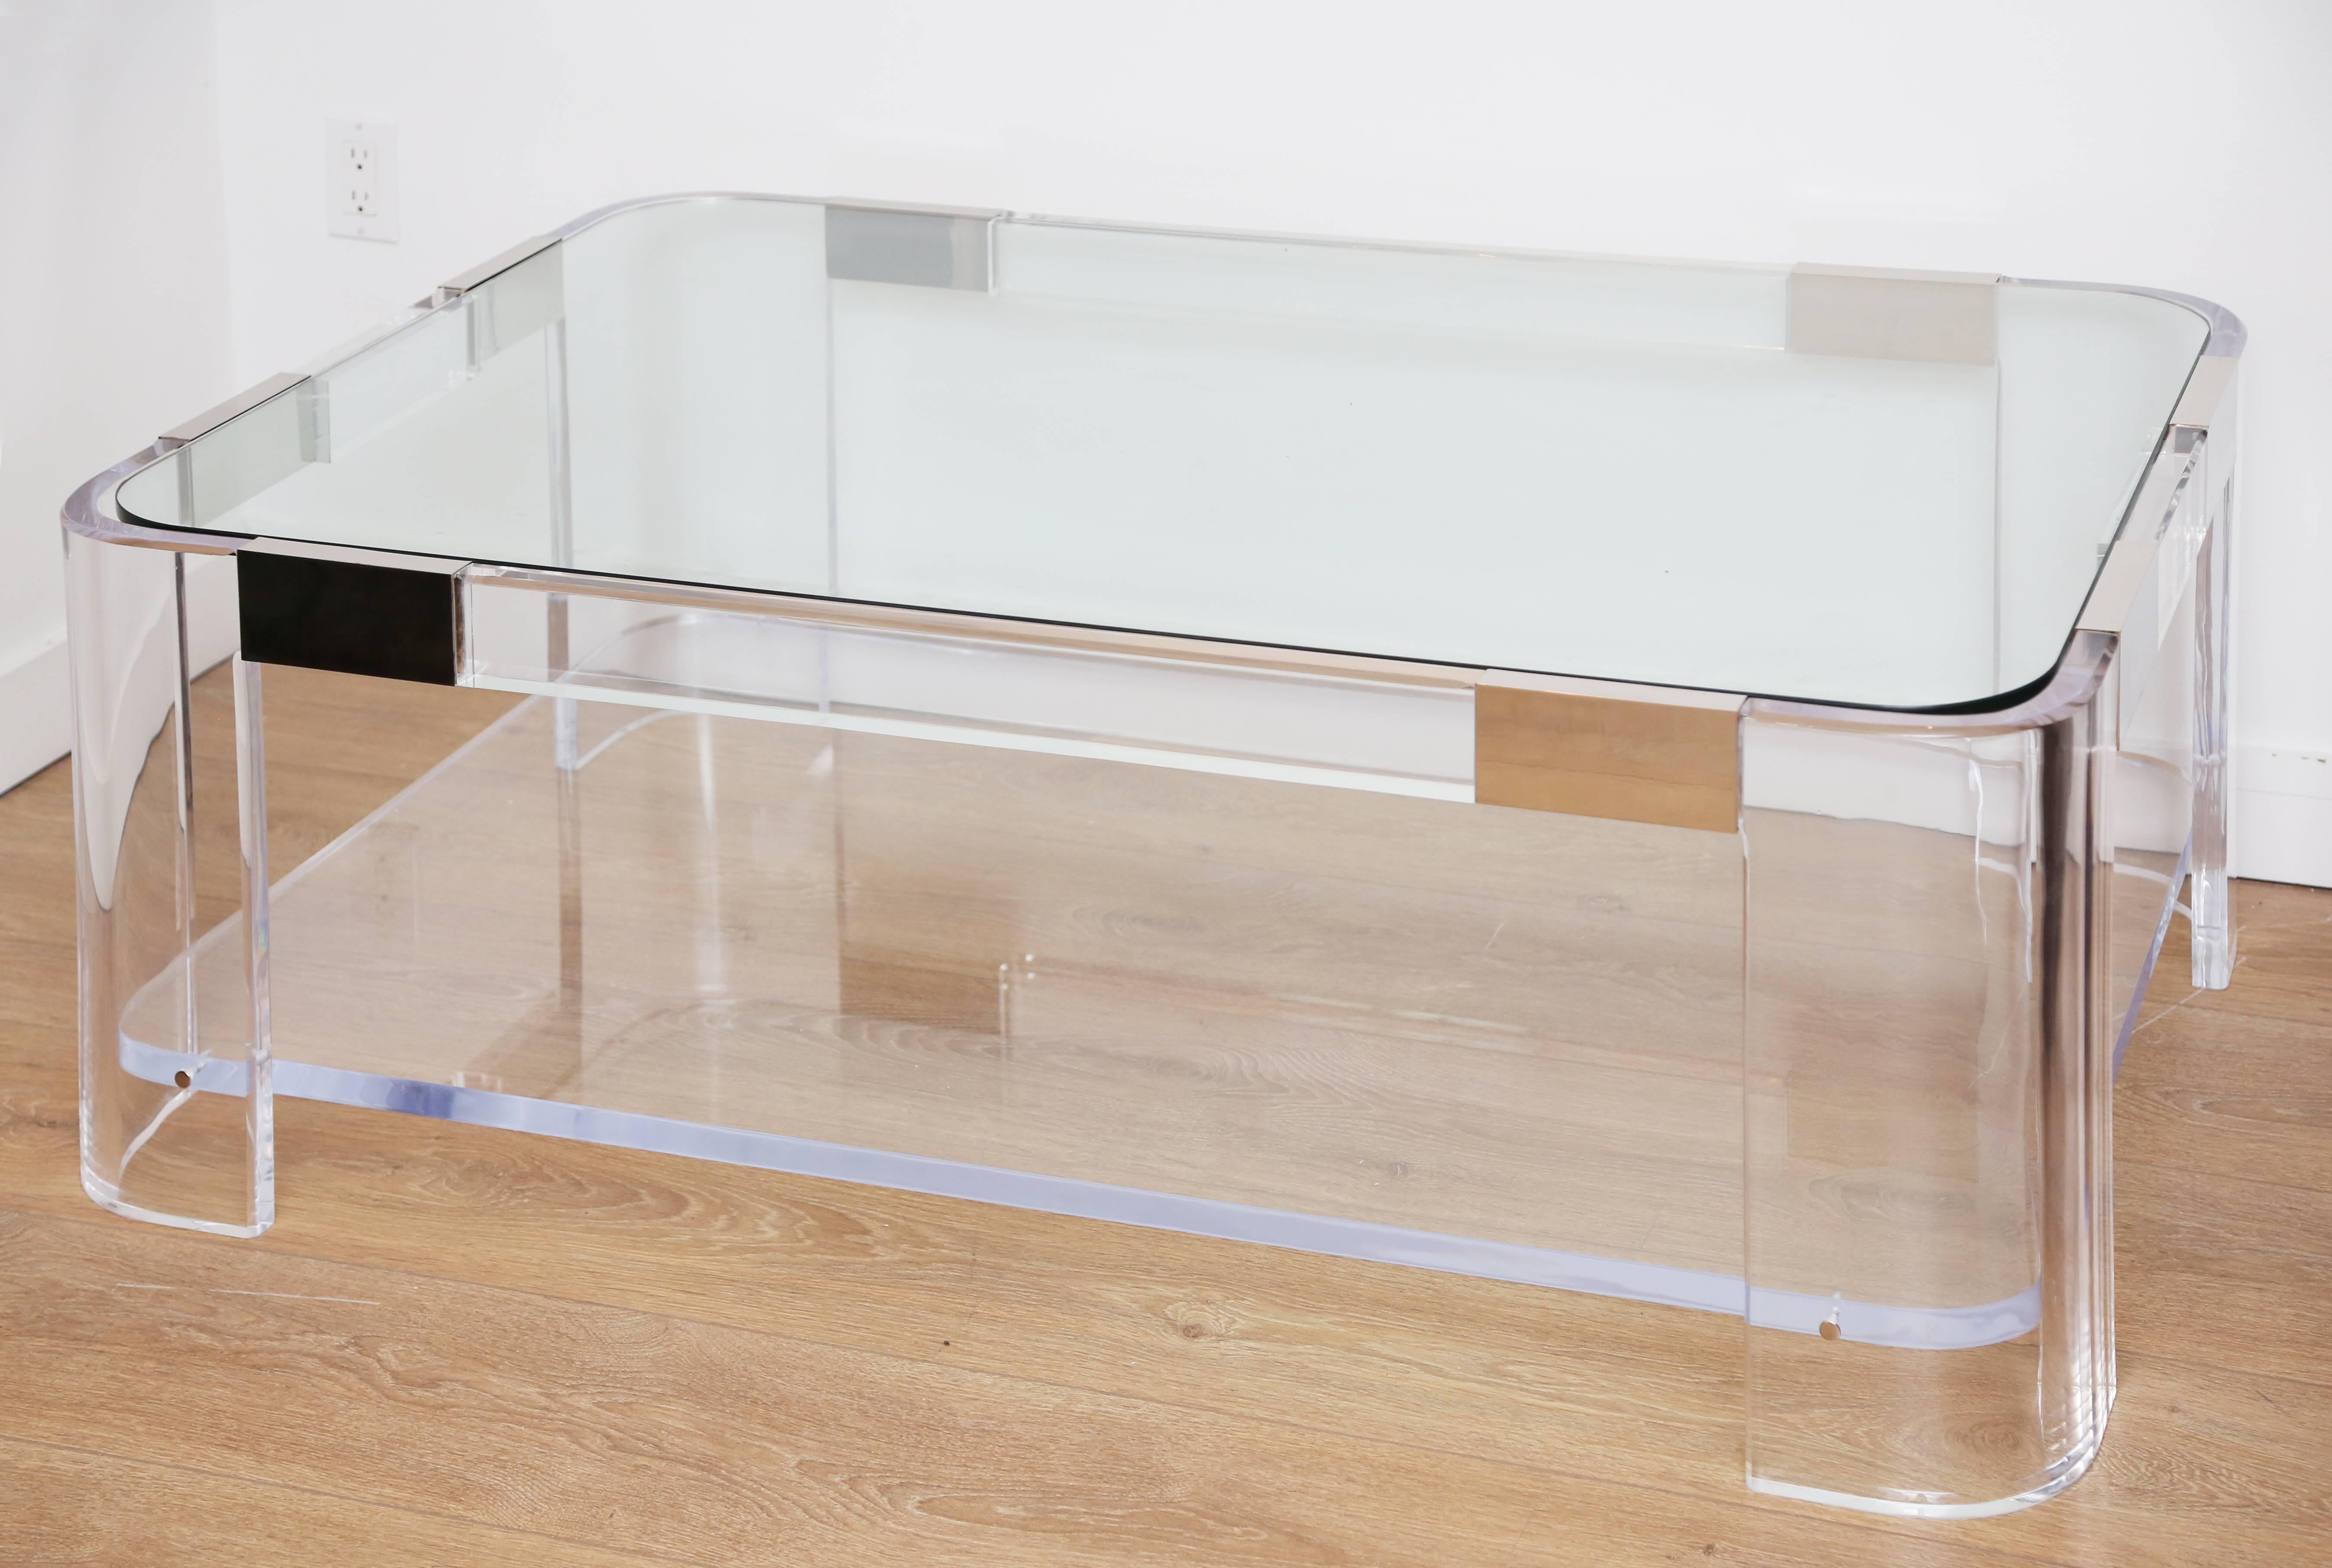 Large 1970s  two-tier lucite and polished nickel waterfall coffee table by Charles Hollis Jones. Lucite is thick and clear recently buffed to perfect condition. Top tier inset glass, bottom tier is made of thick lucite.